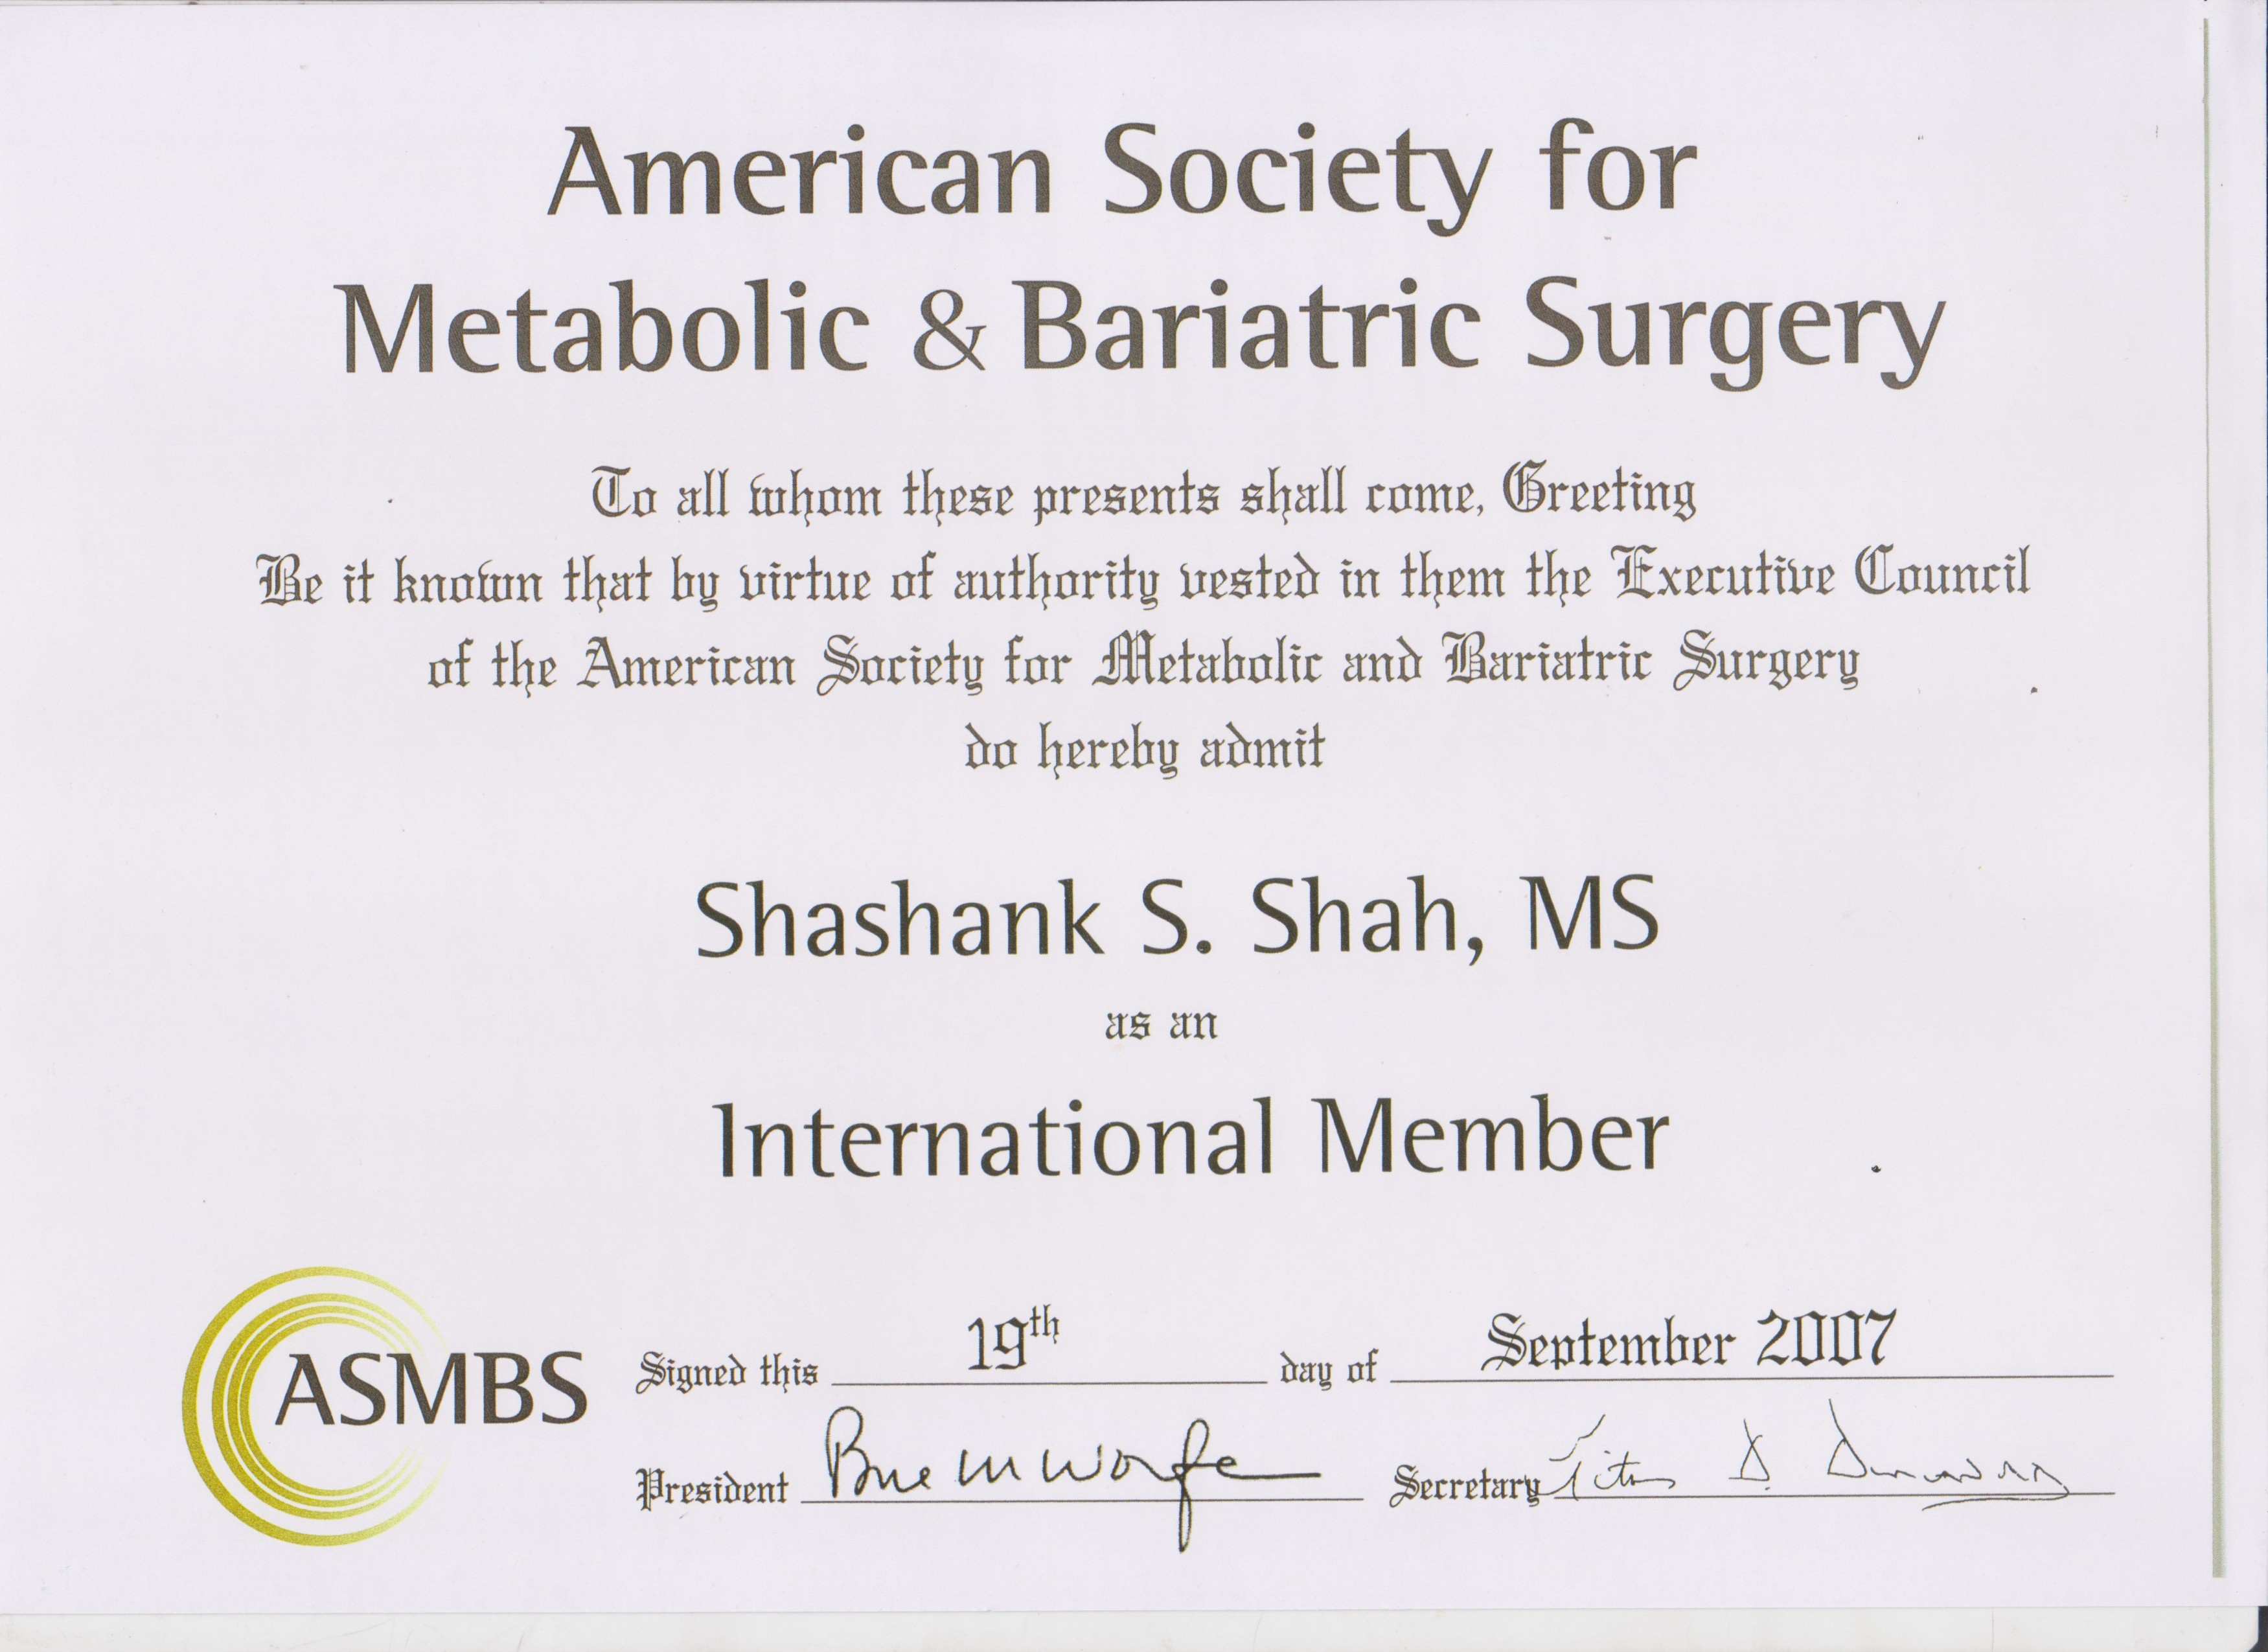 Dr Shashank Shah is an International Member of American Society for Metabolic and Bariatric Surgery since 2007. 